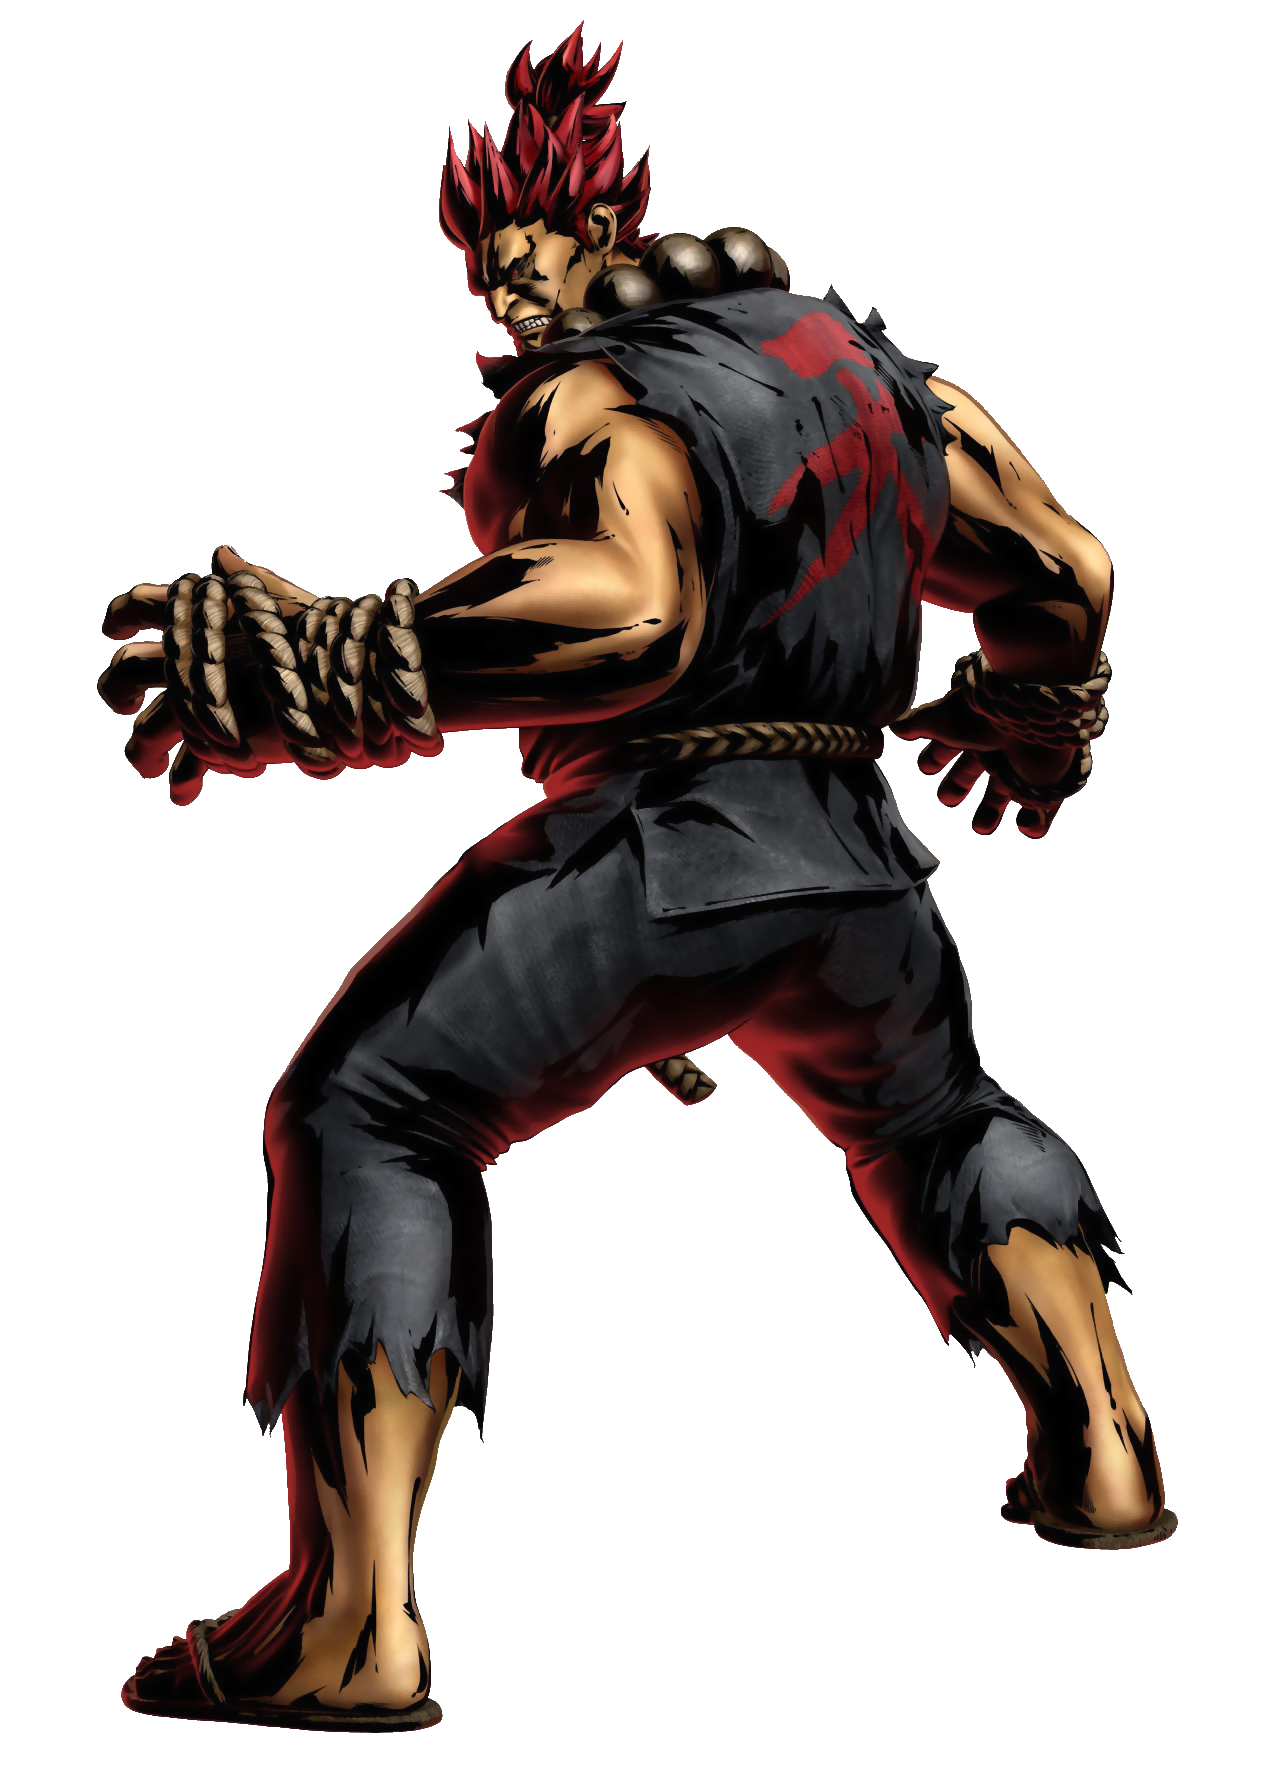 GET READY FOR NEXT BIG CHARACTER AKUMA!!!! (Street Fighter Duel